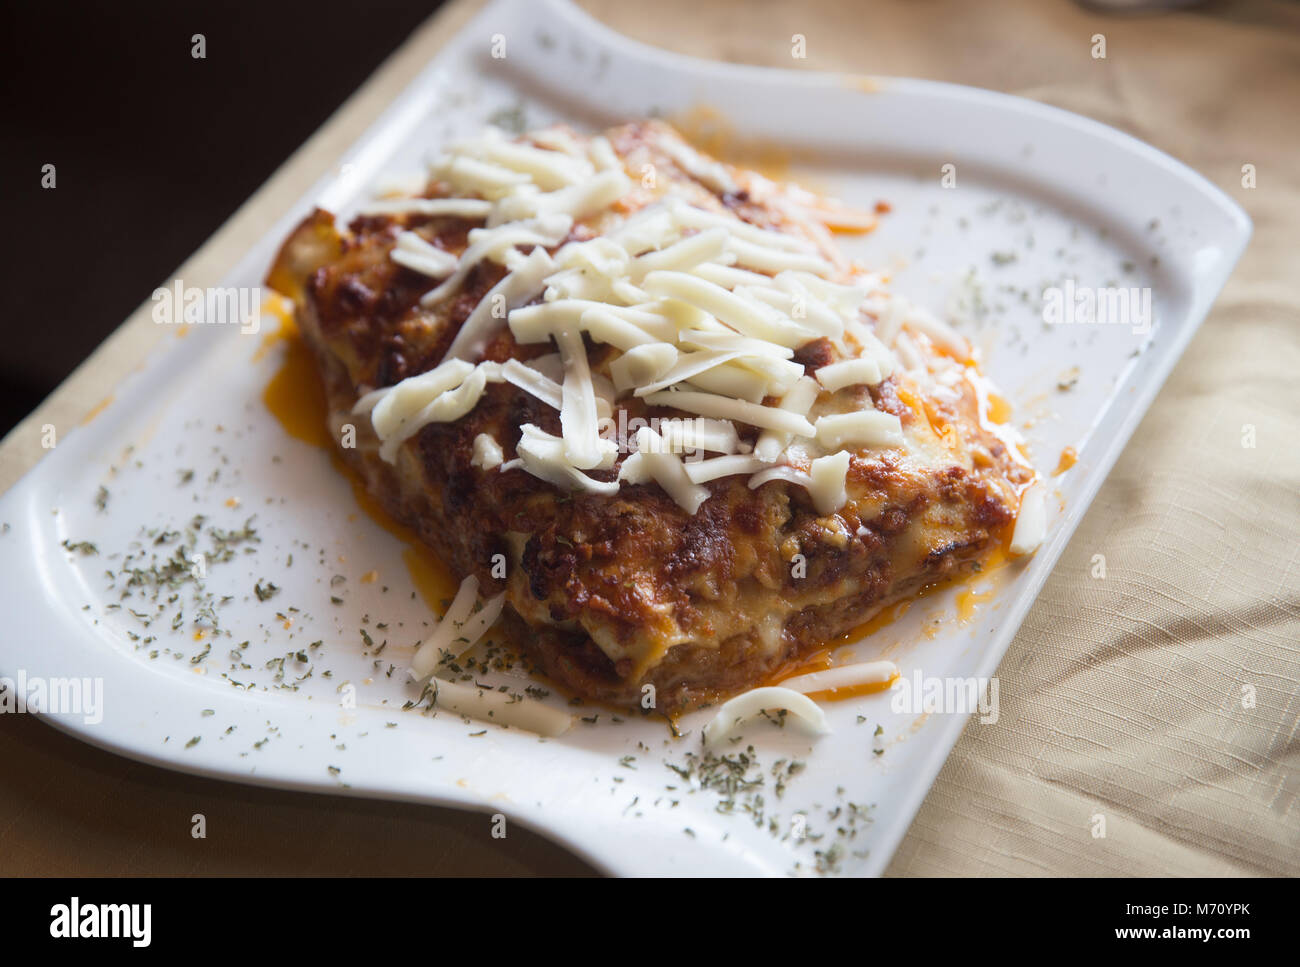 Homemade lasagna from scratch Stock Photo - Alamy